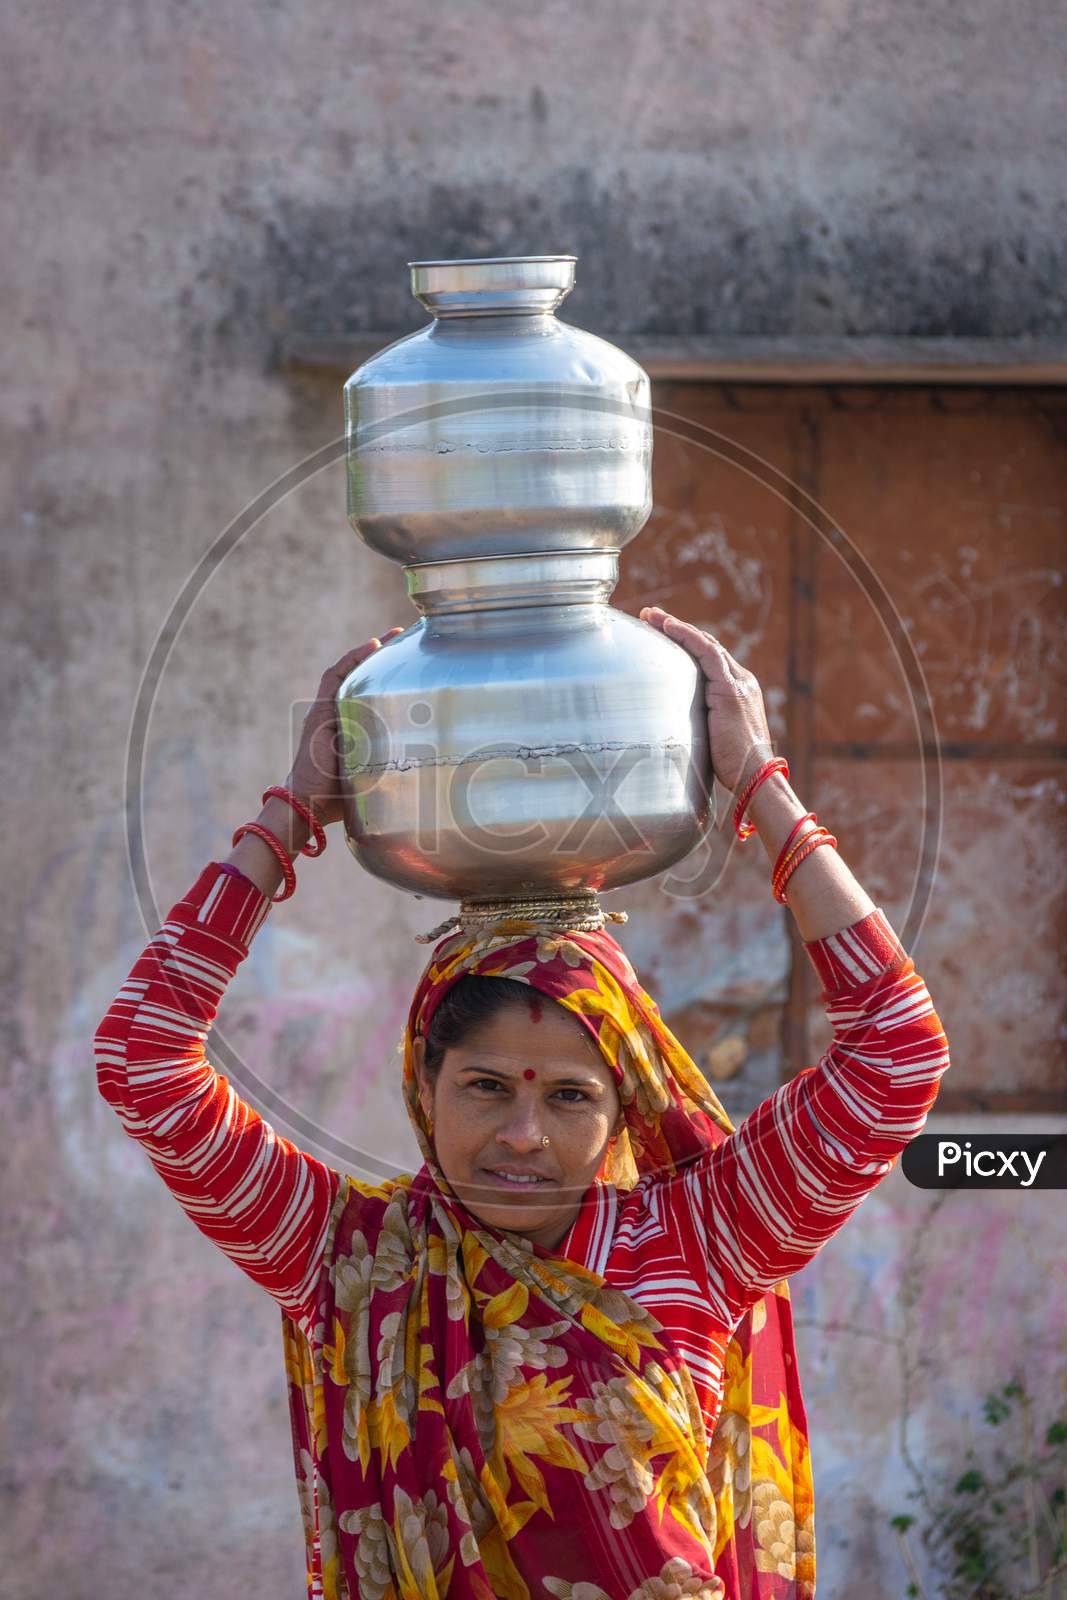 TIKAMGARH, MADHYA PRADESH, INDIA - JANUARY 23, 2021: An Indian woman carrying a container of water on her head.